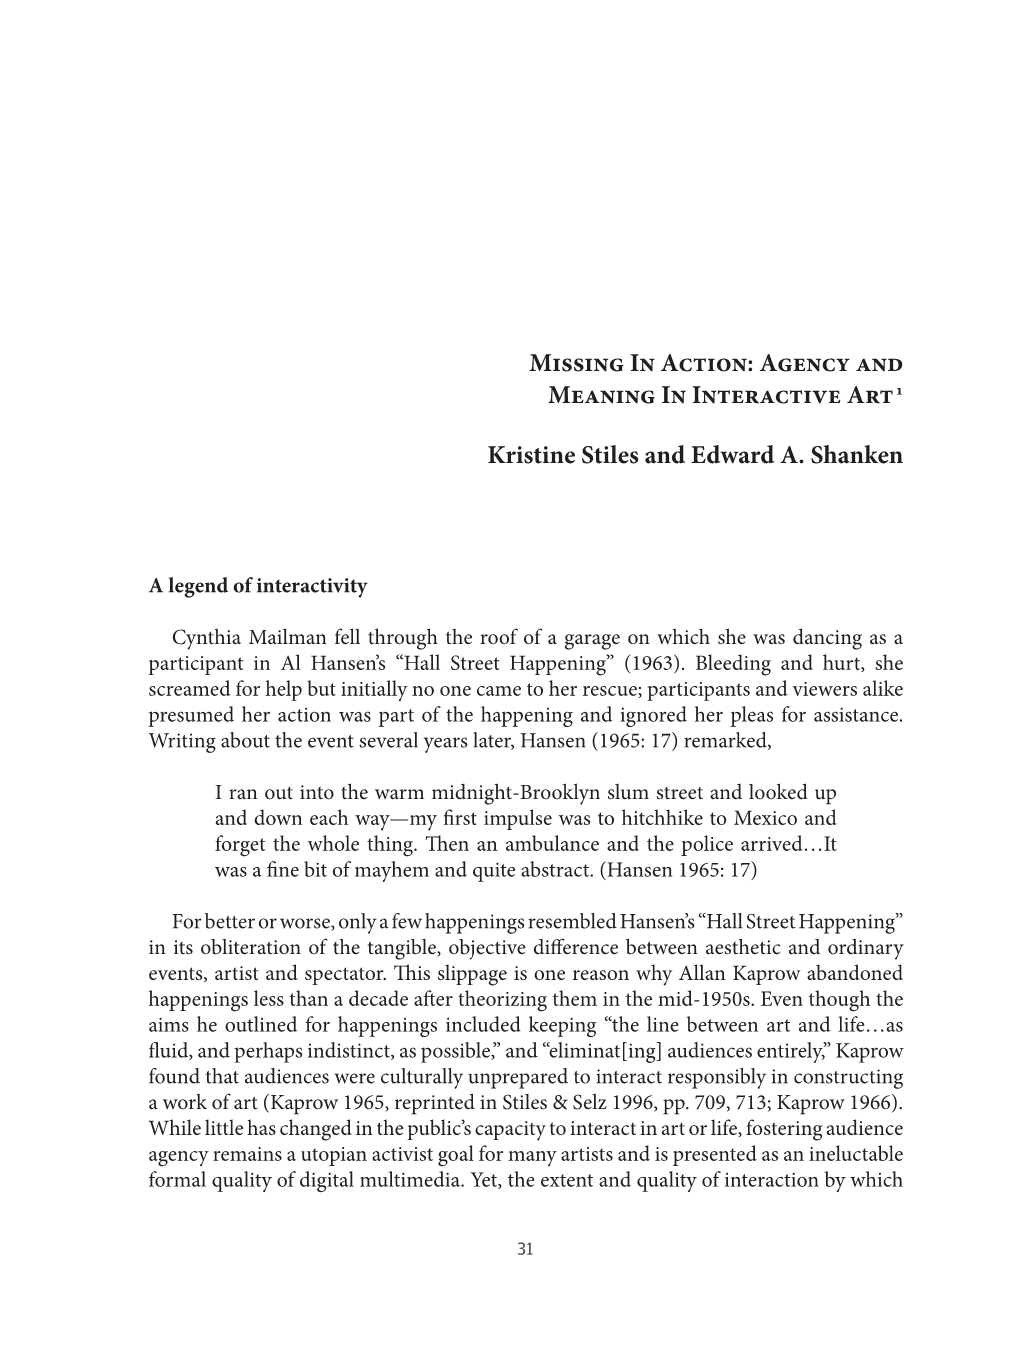 Missing in Action: Agency and Meaning in Interactive Art1 Kristine Stiles and Edward A. Shanken